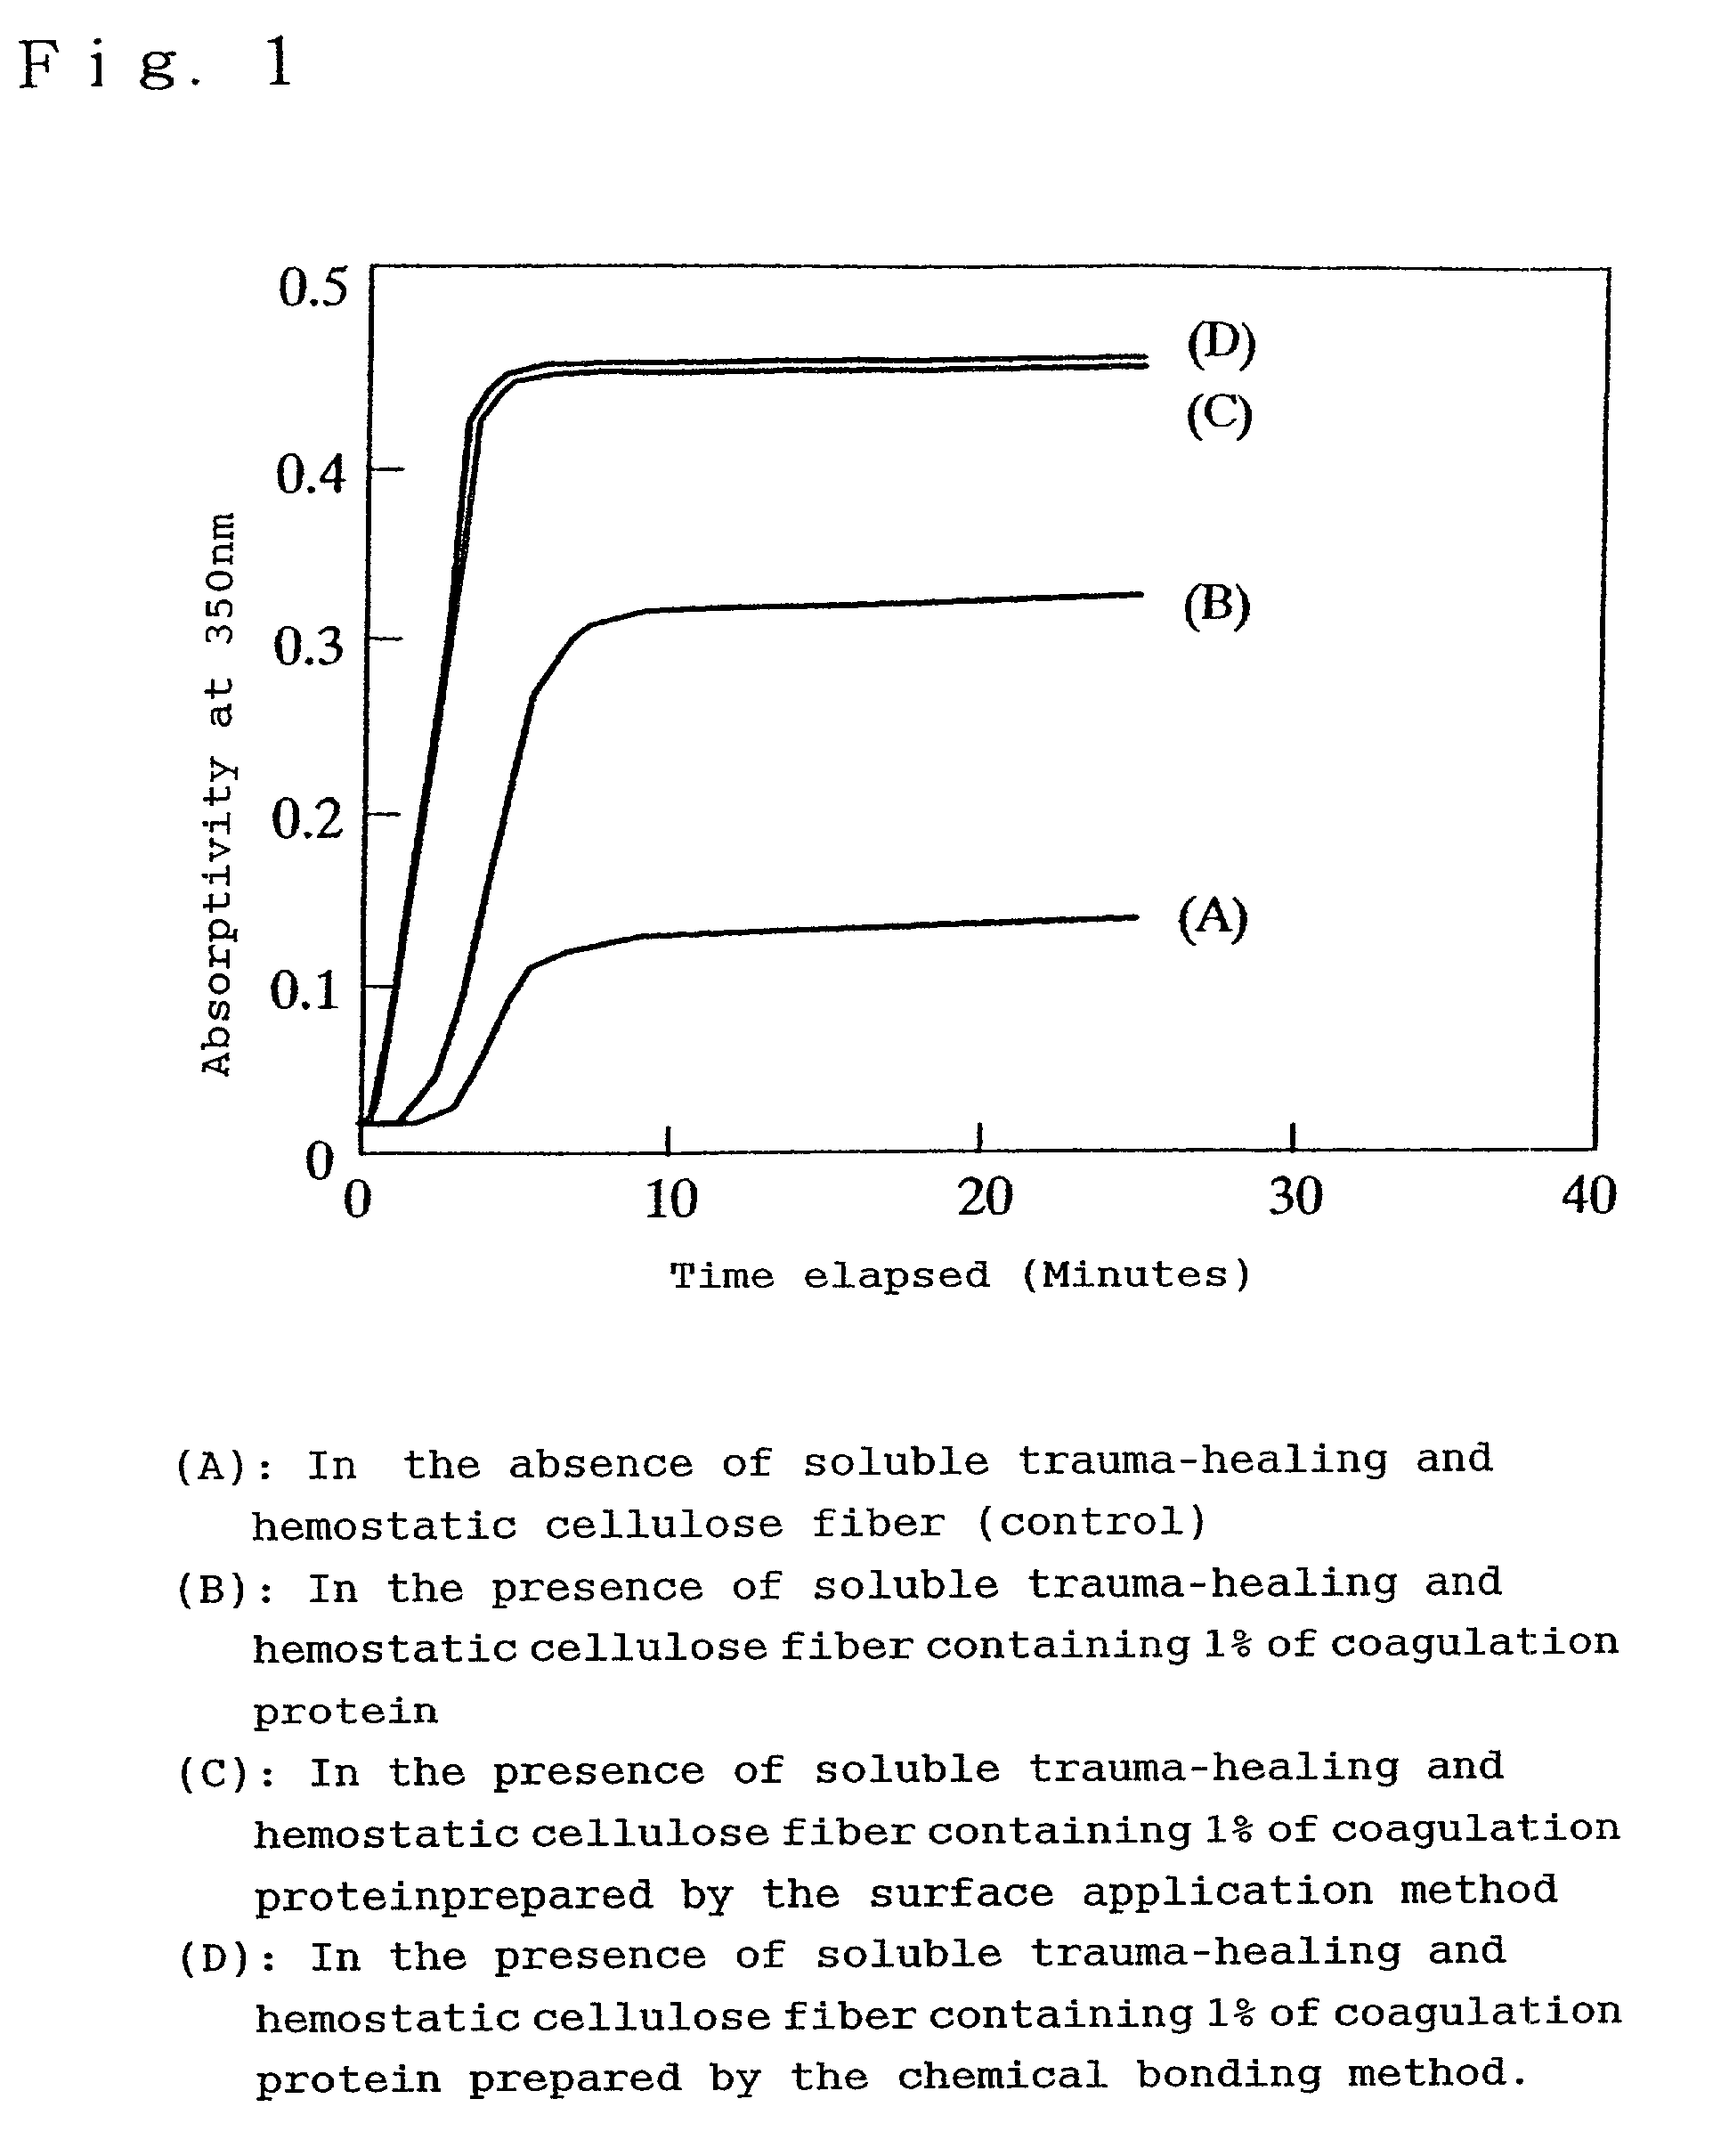 Hemostatic soluble cellulose fibers containing coagulating protein for treating wound and process for producing the same